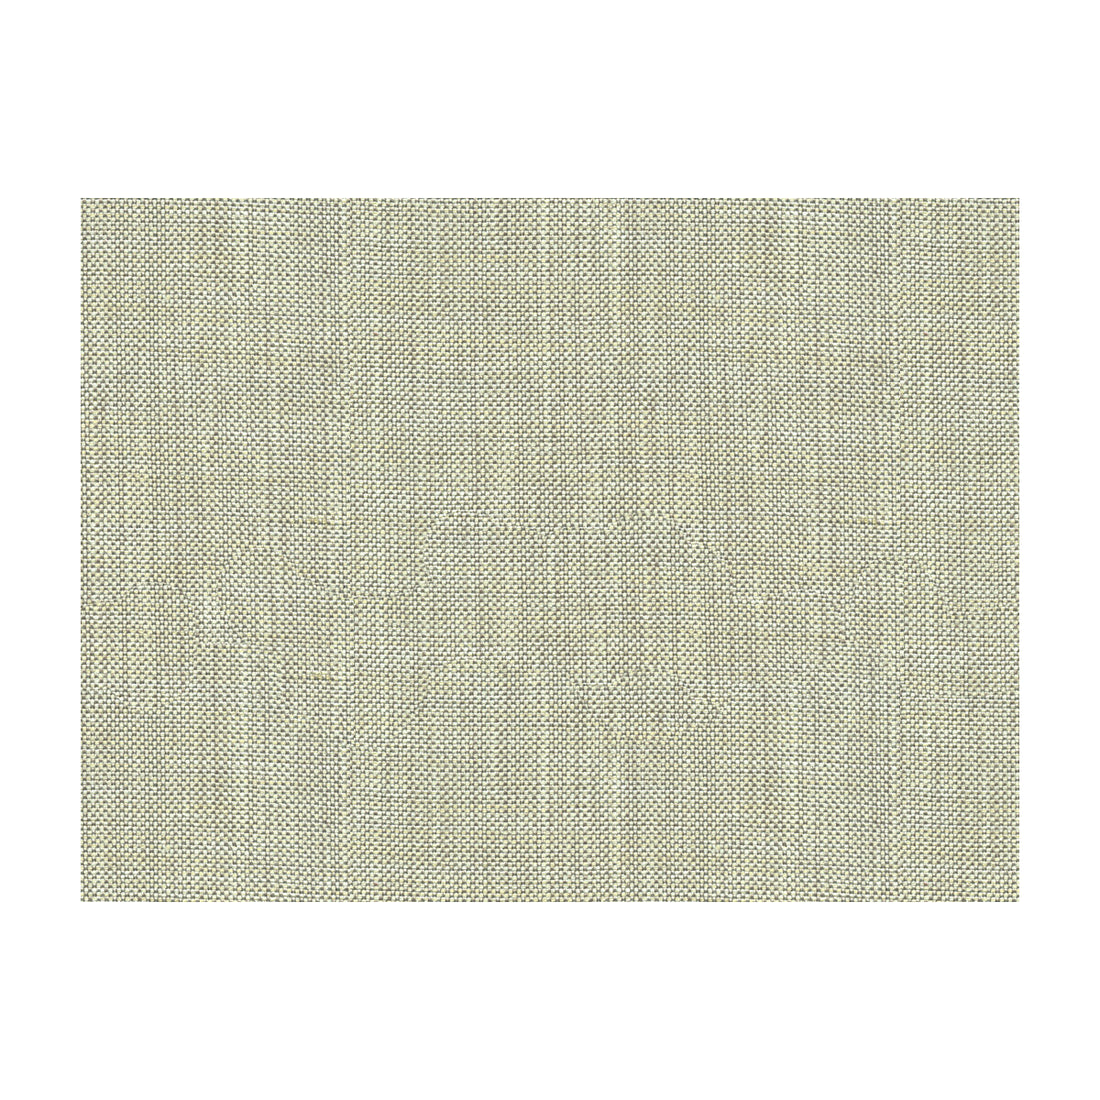 Kravet Basics fabric in 30299-2111 color - pattern 30299.2111.0 - by Kravet Basics in the Perfect Plains collection